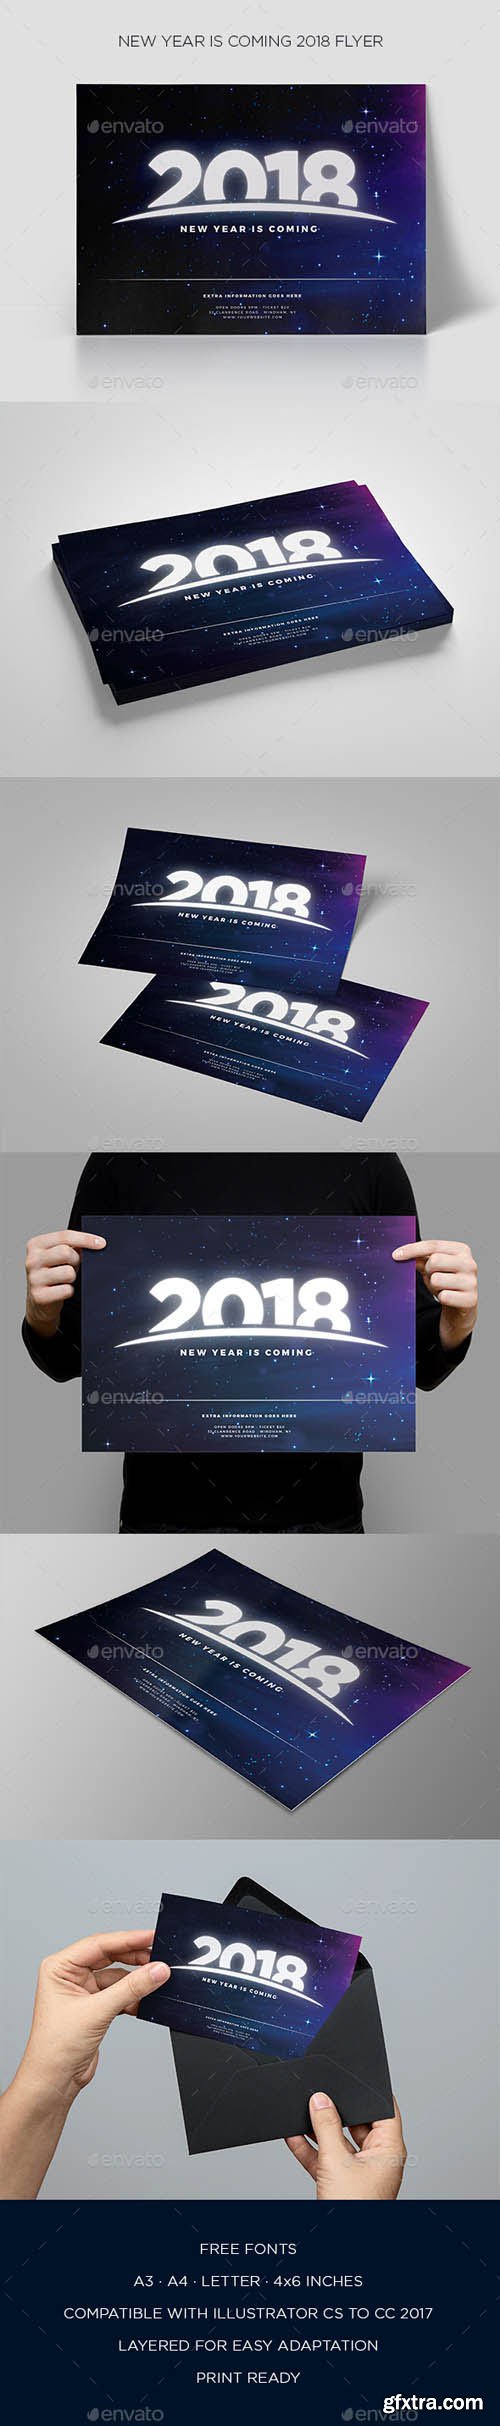 GR - New Year Coming 2018 Flyer 20924533